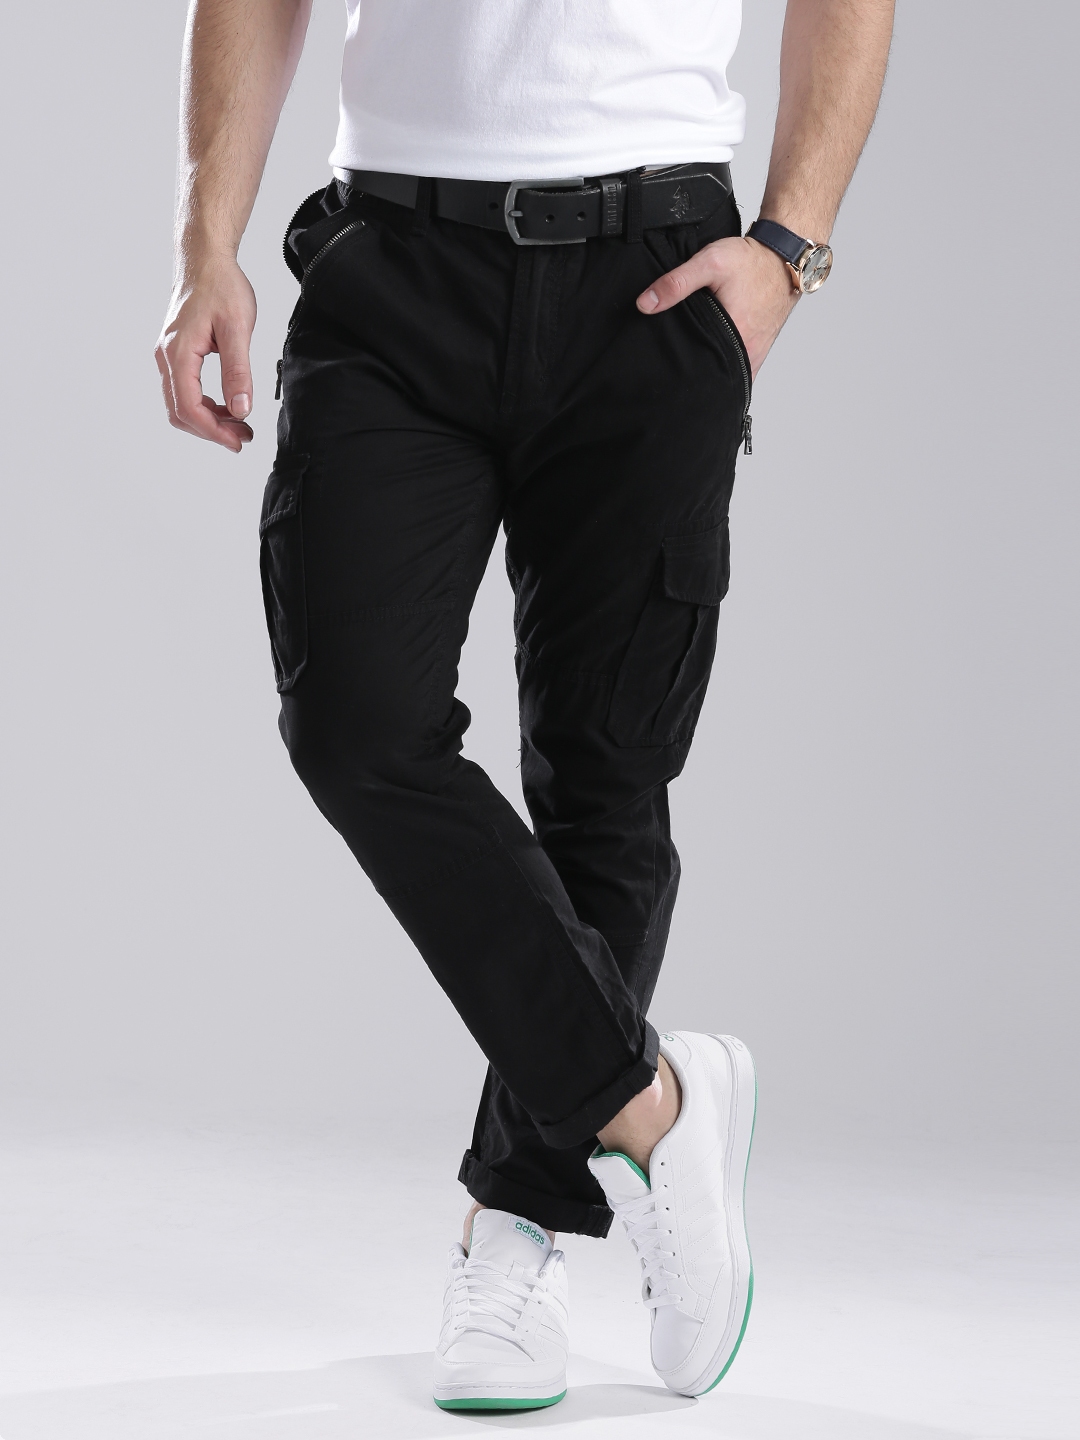 Buy GAS Black Mens Slim Fit 6 Pocket Cargo Trousers  Shoppers Stop